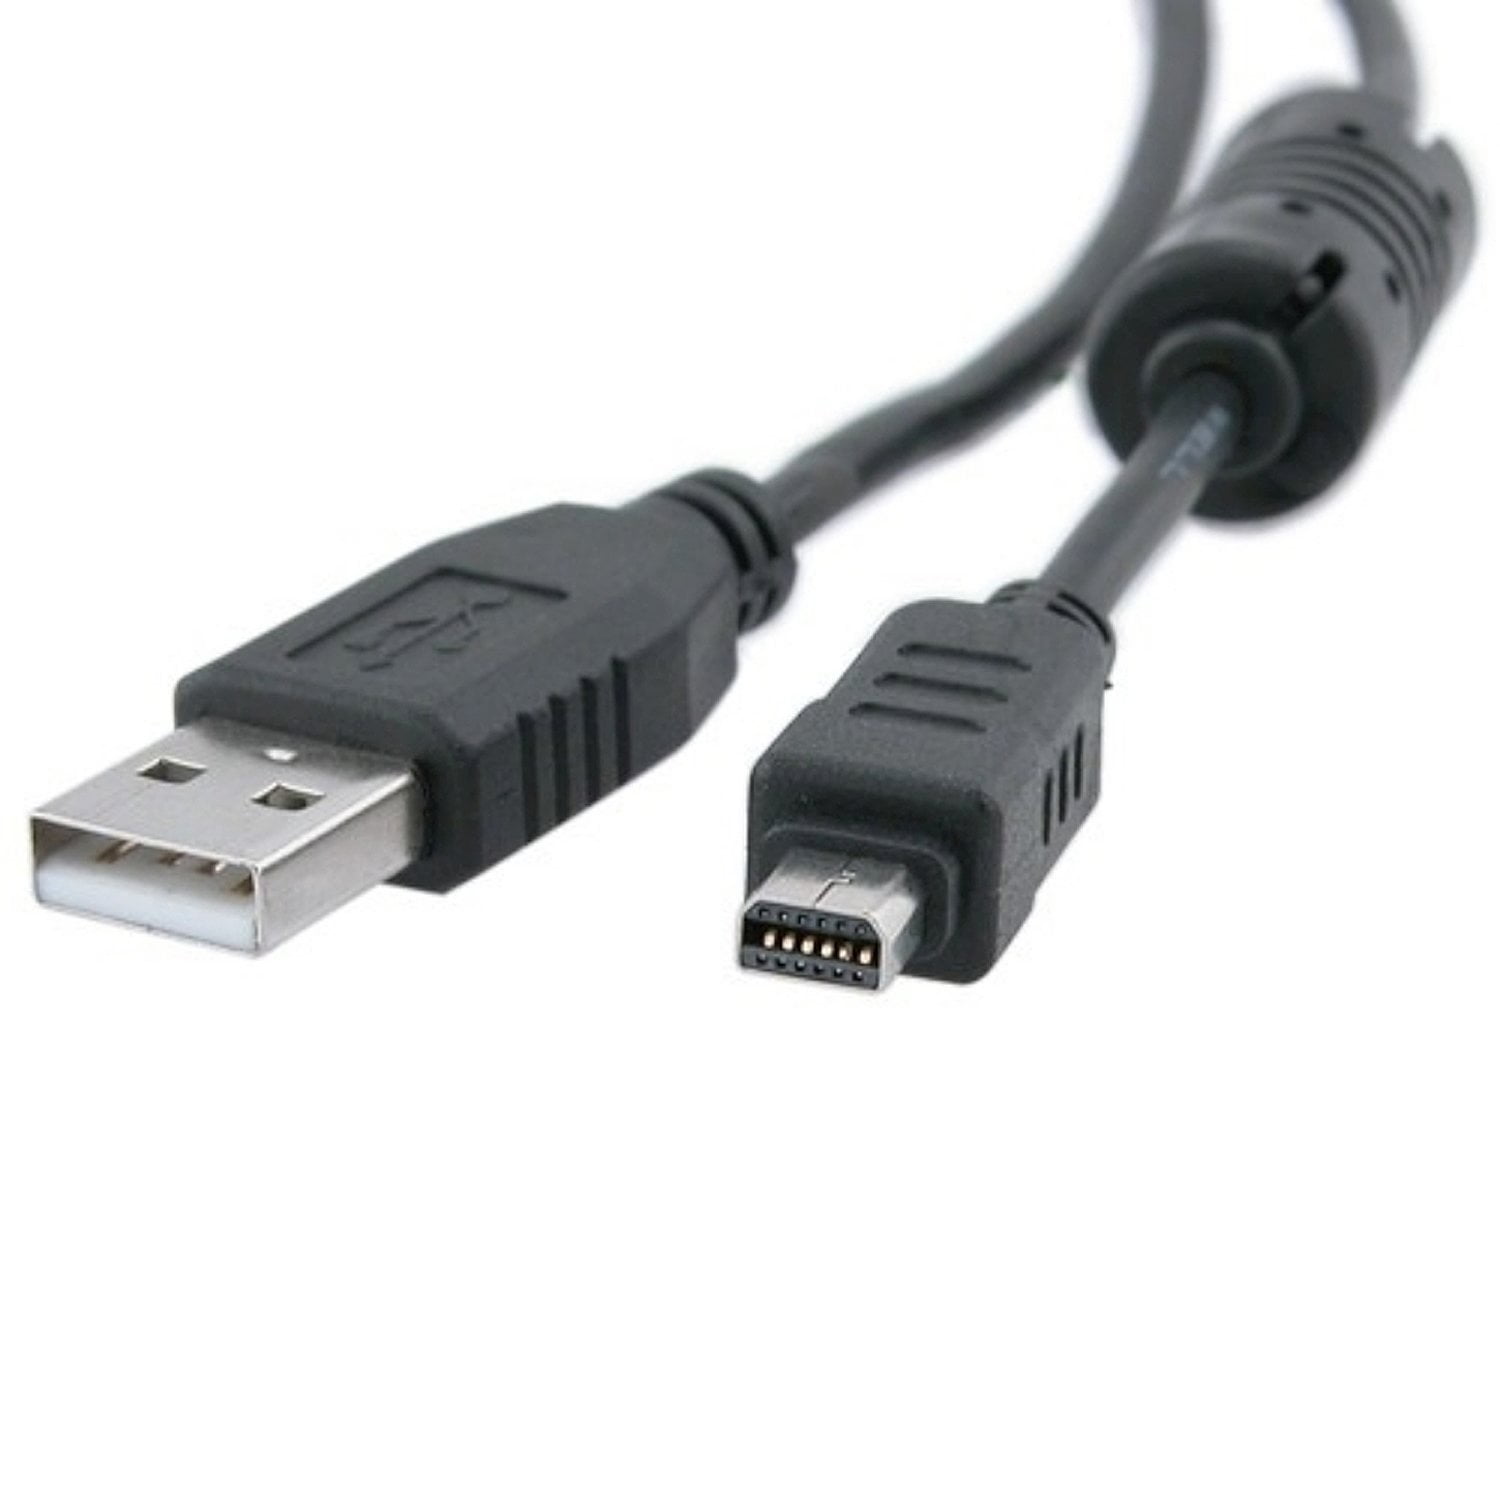 Lysee Data Cables USB Charger+Data SYNC Cable Cord For Olympus camera u Stylus Tough TG-310 TG-860